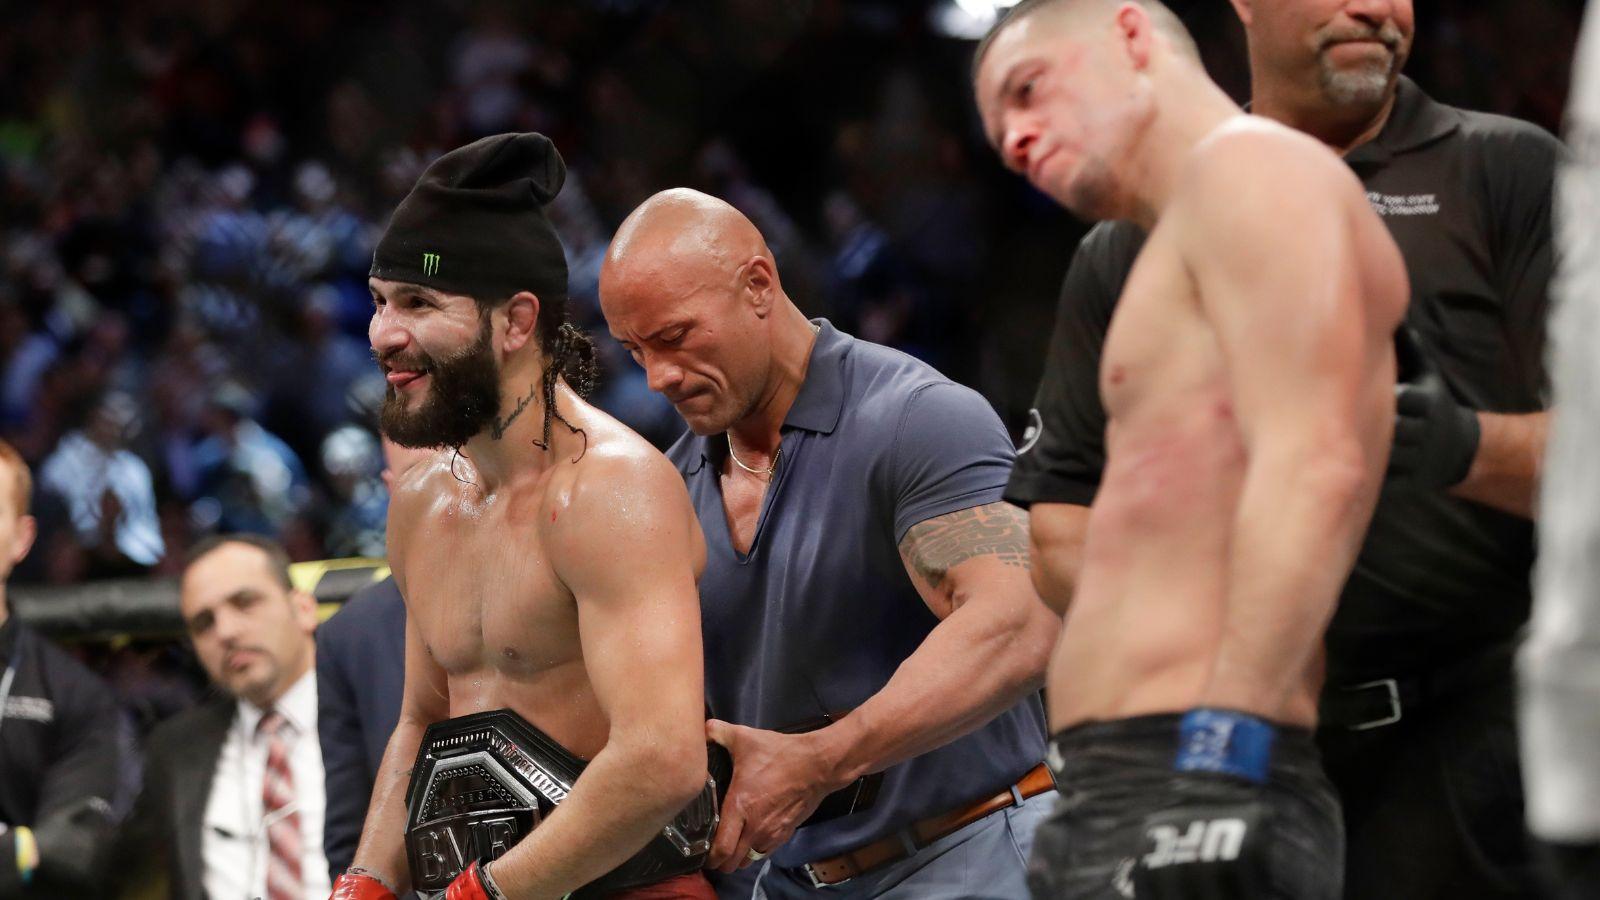 Jorge Masvidal (left) and Nate Diaz (right) in the aftermath of their UFC 244 fight.